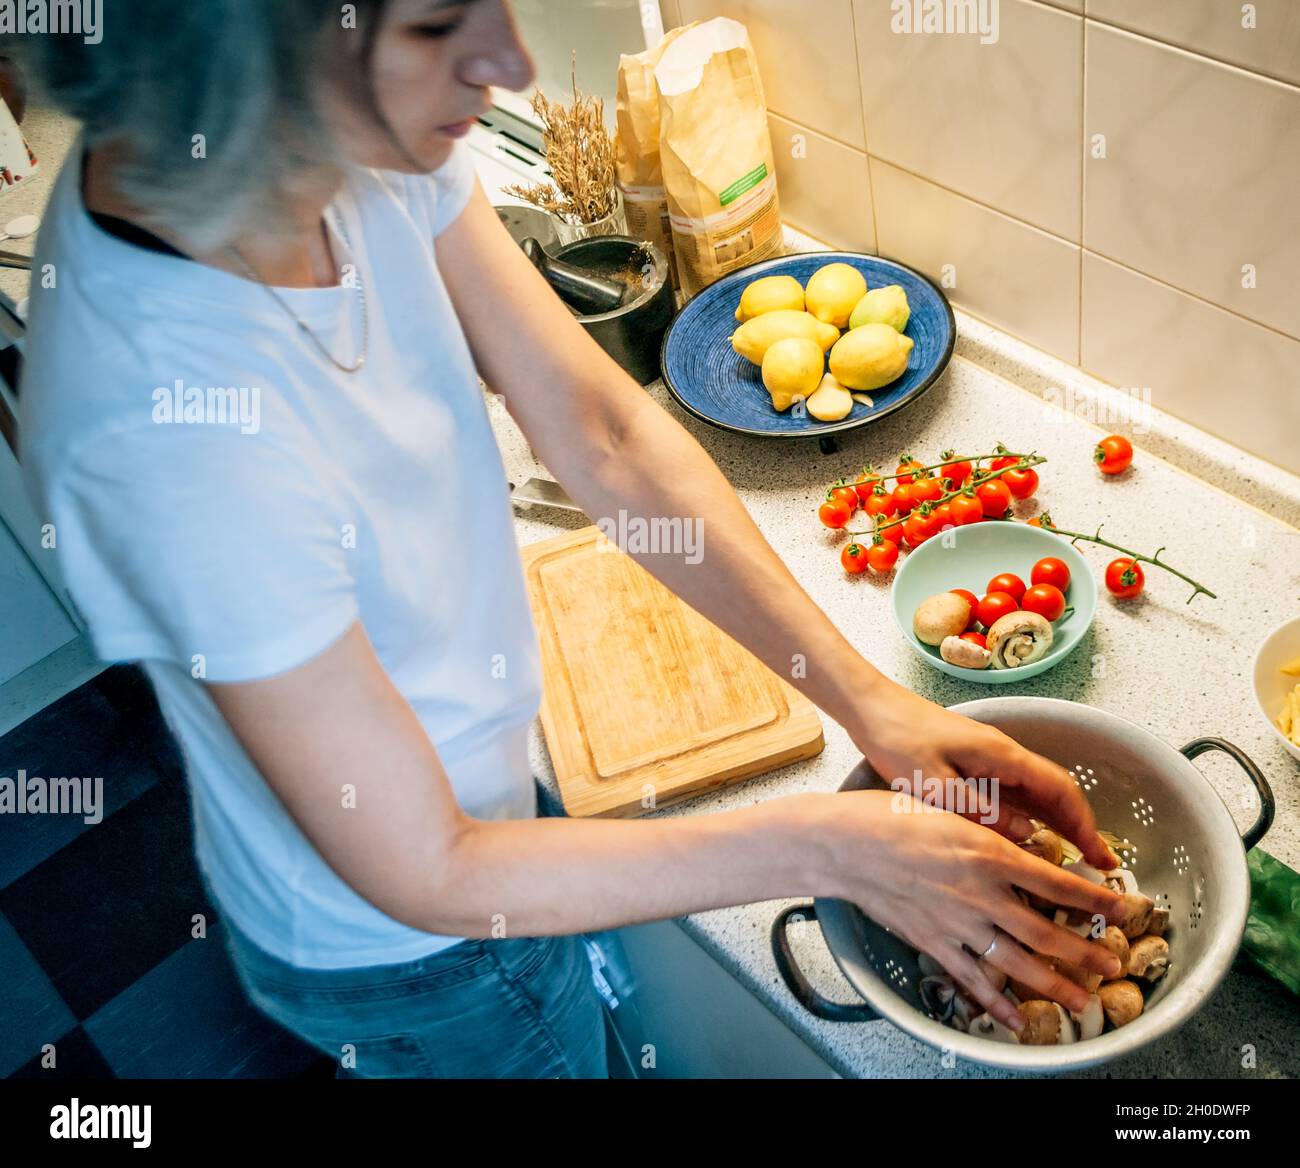 A woman puts vegetables in a colander while cooking dinner Stock Photo